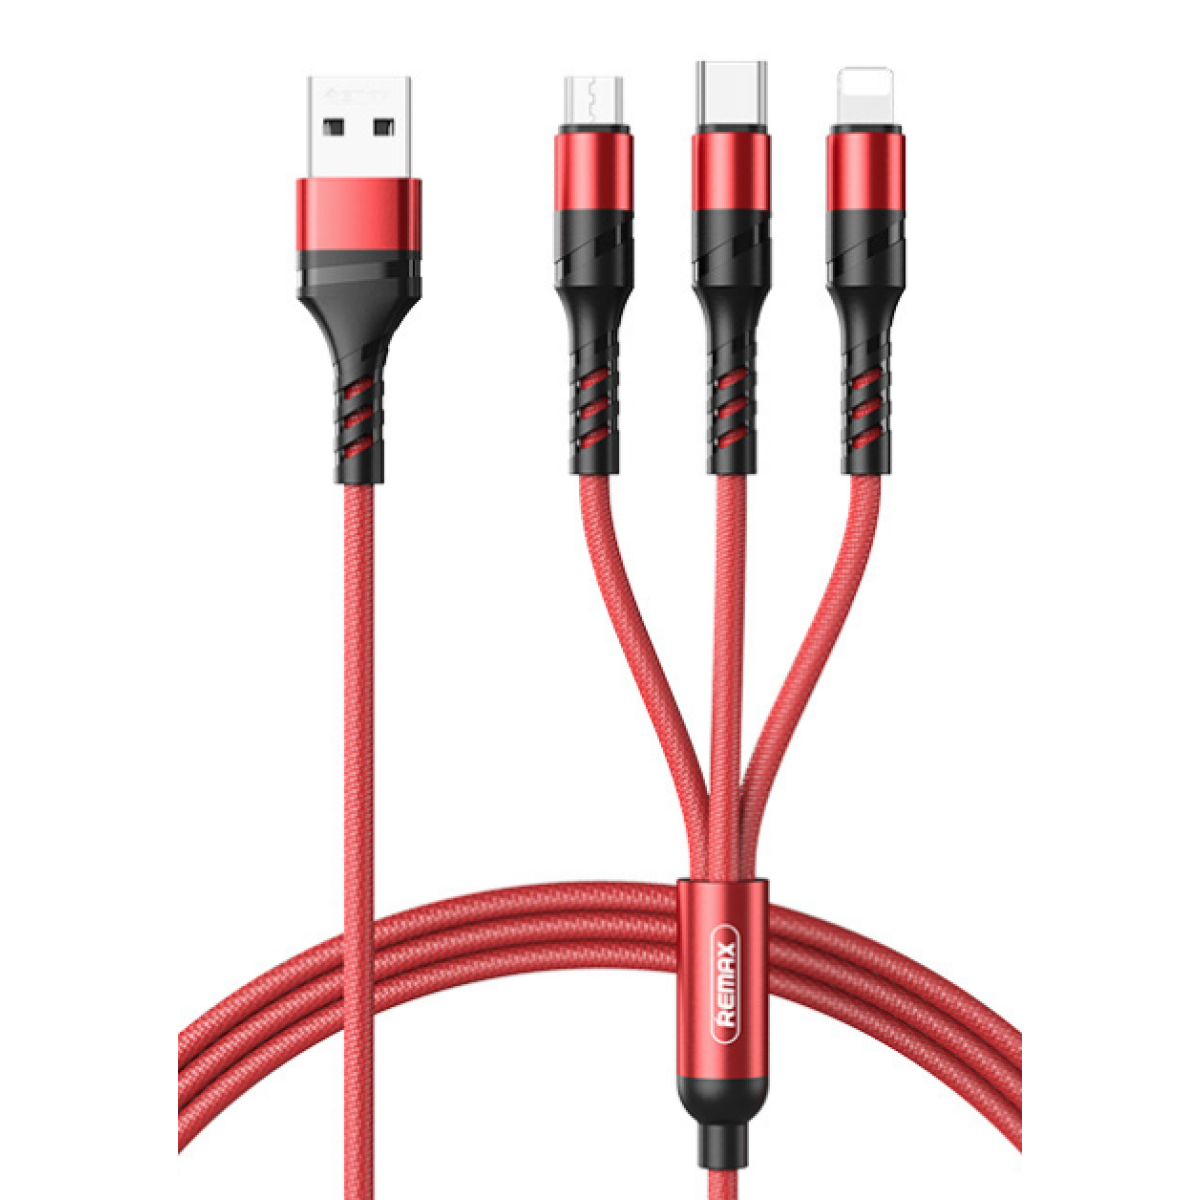 Remax RC-186TH 3 in 1 Charging Cable | RC-186TH | CSE - Computer ...